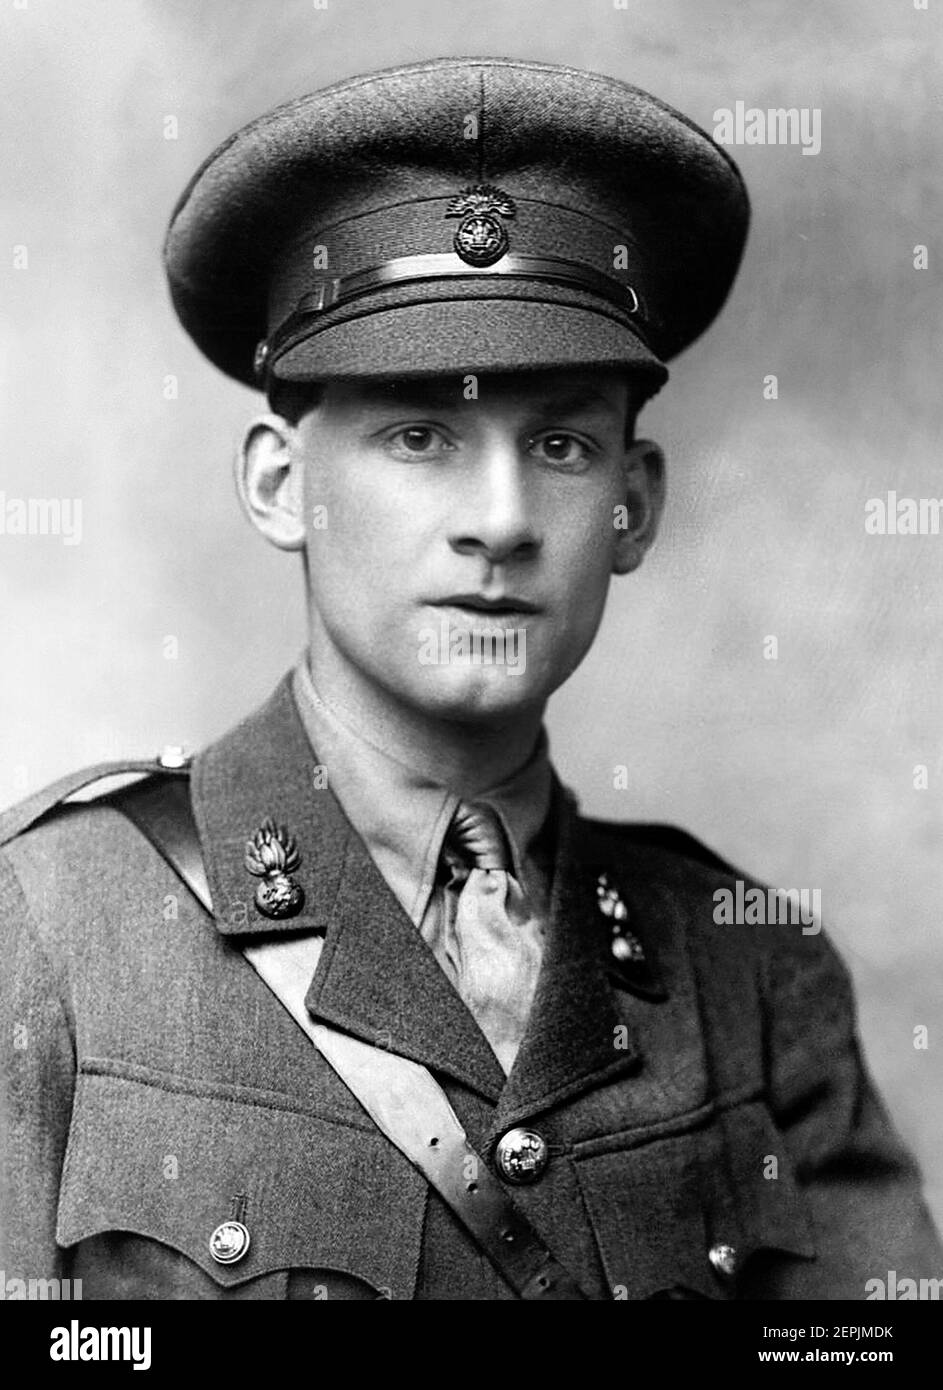 Siegfried Sassoon (1886-1967). Portrait of the English poet and soldier by George Charles Beresford, c.1915. Stock Photo